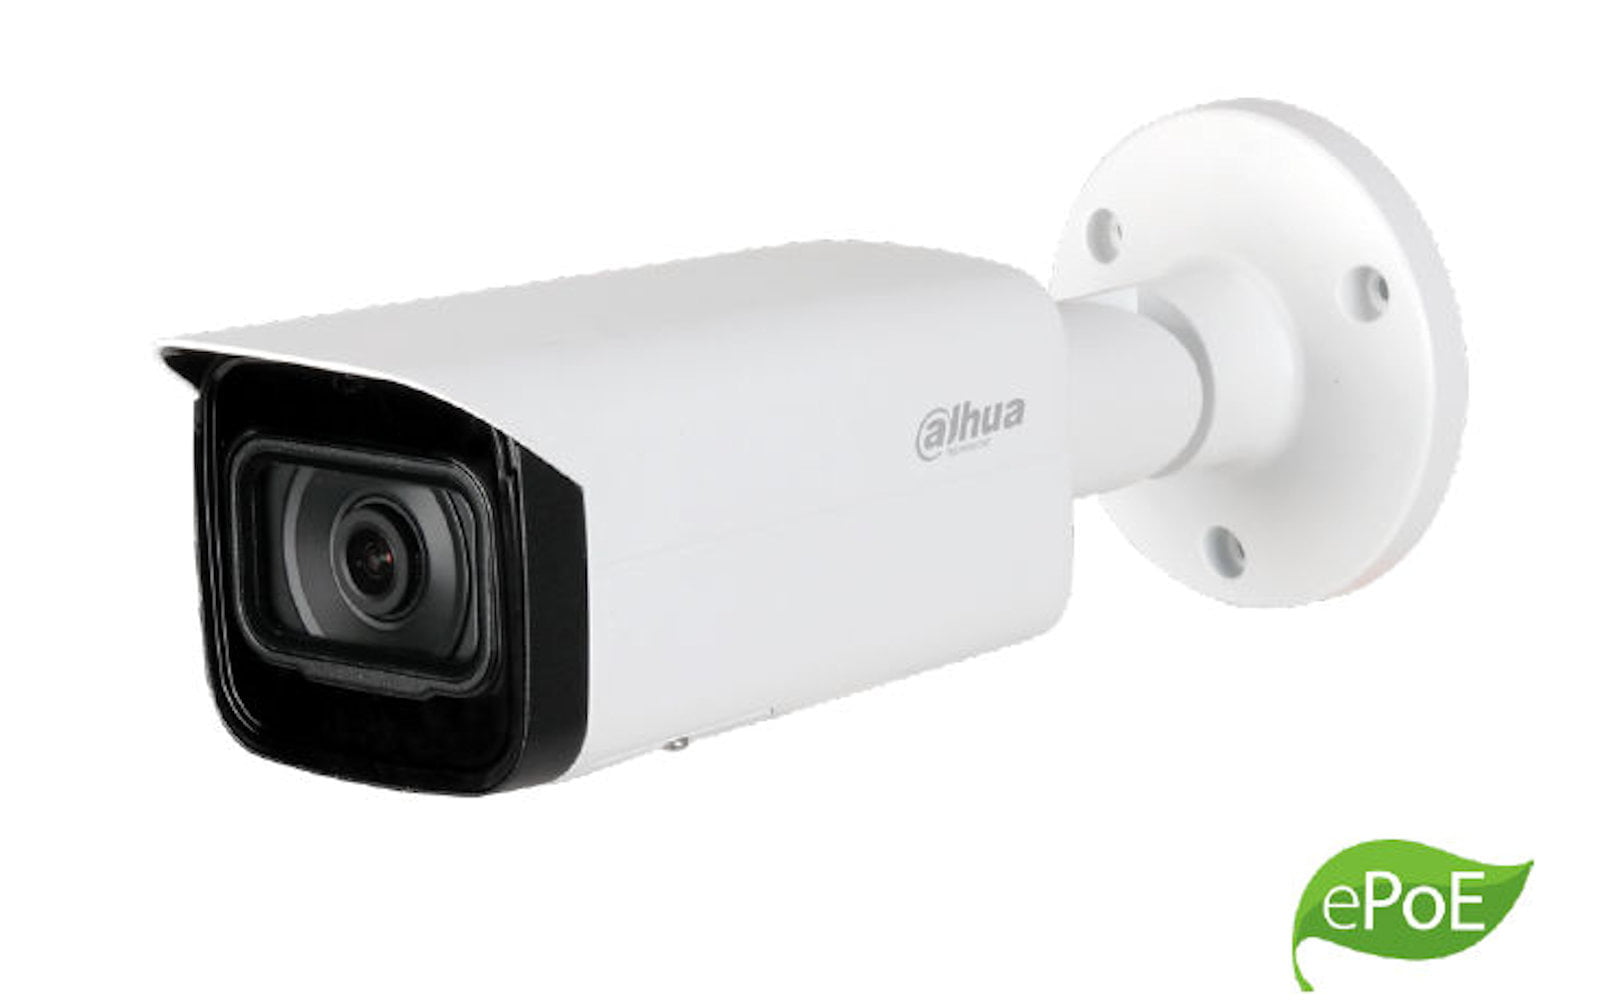 N45EF63 4MP Color 3.6 mm ePoE Outdoor Network Bullet Camera with Night Color Technology, RJ45 Connection